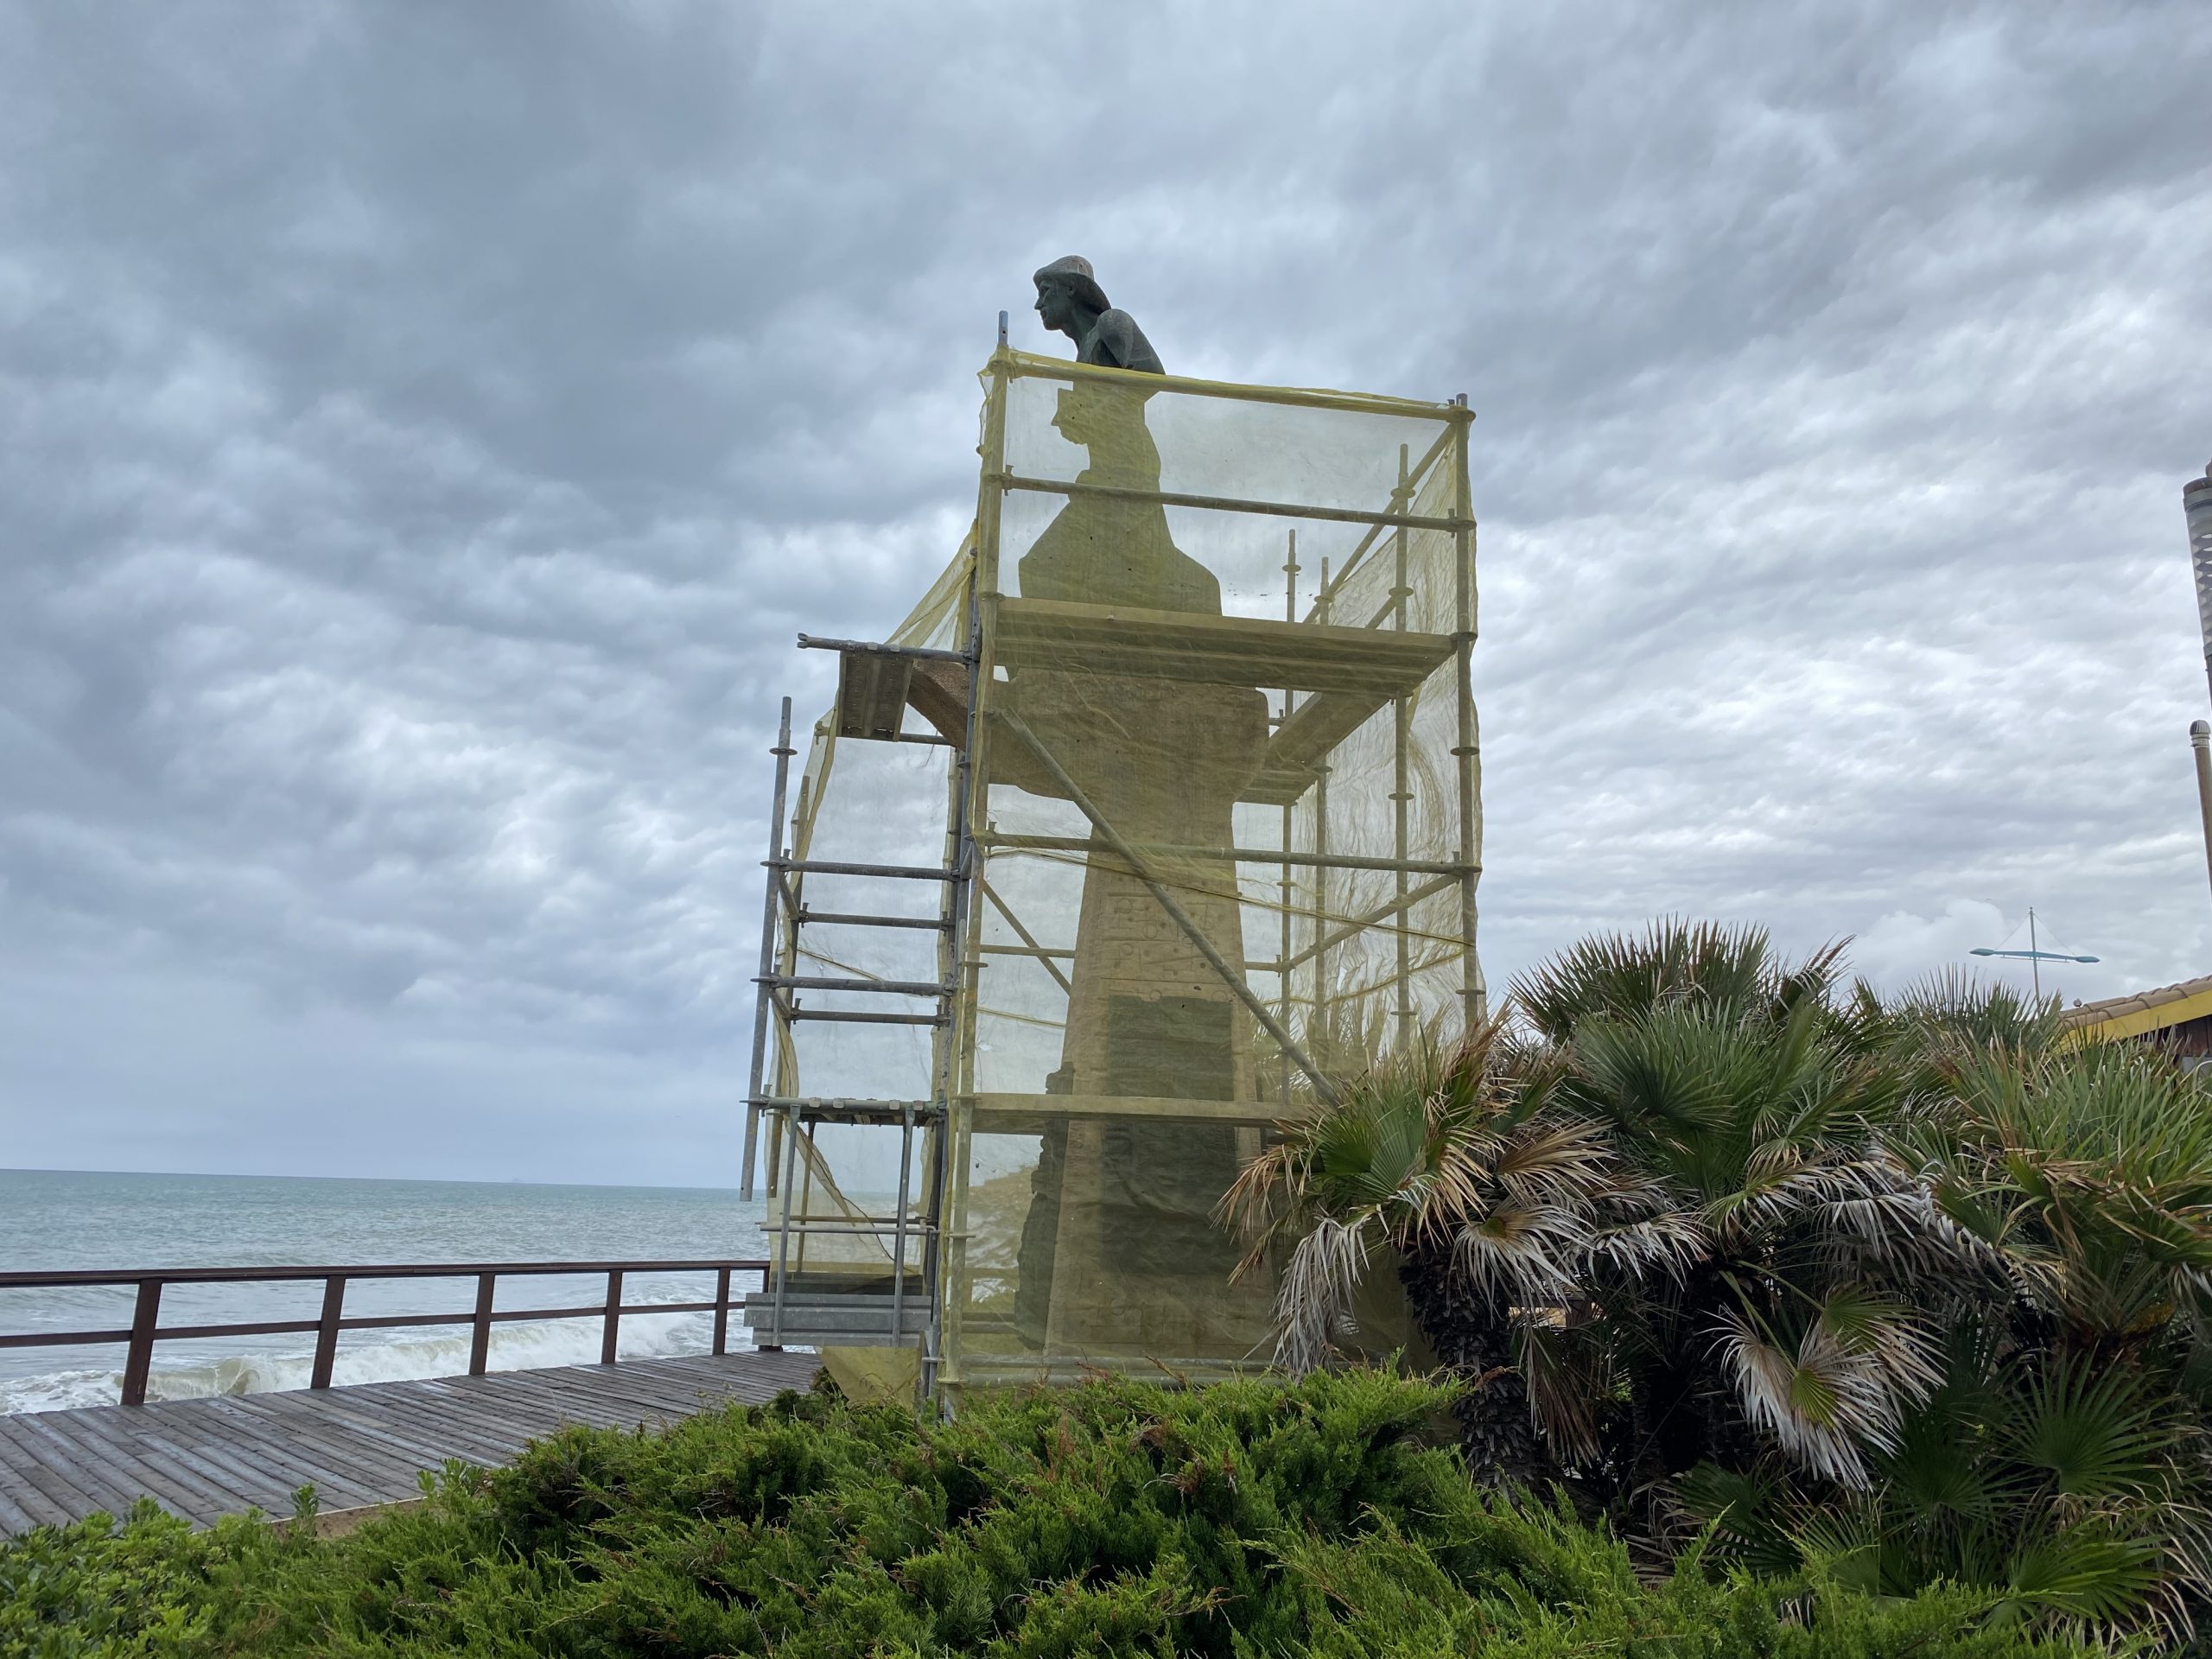 Landmark In A Costa Blanca City In Spain Gets A Full Clean Some 36 Years After Being Unveiled